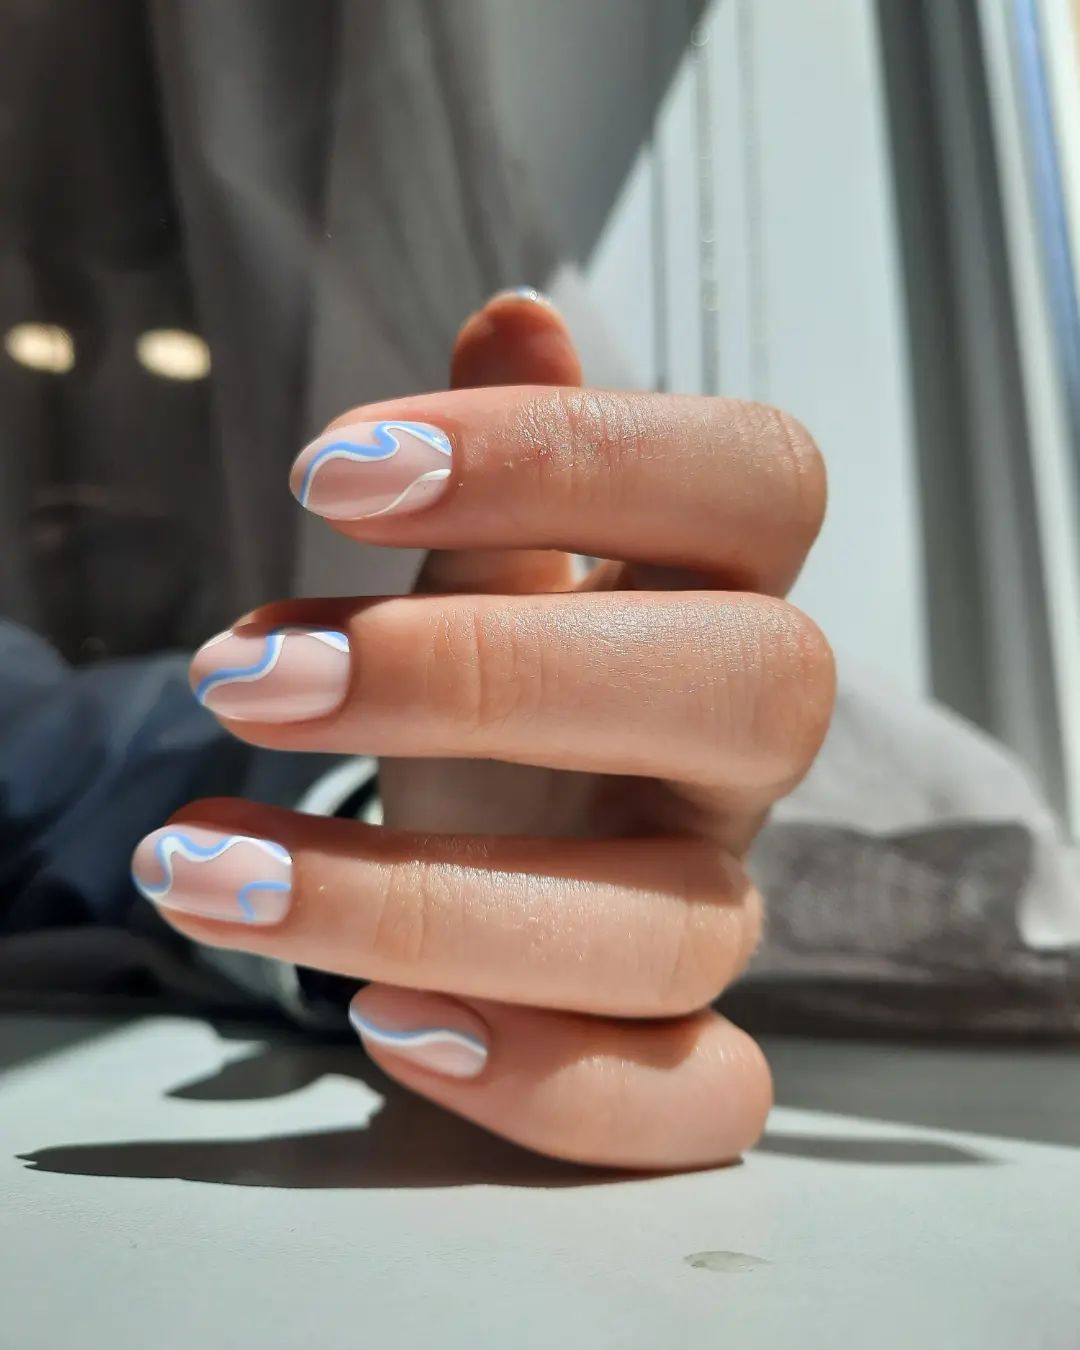 Swirl nails are so popular, aren't they? You don't need to use light blue color fully on your nails, so you can draw some blue swirls on a nude base.